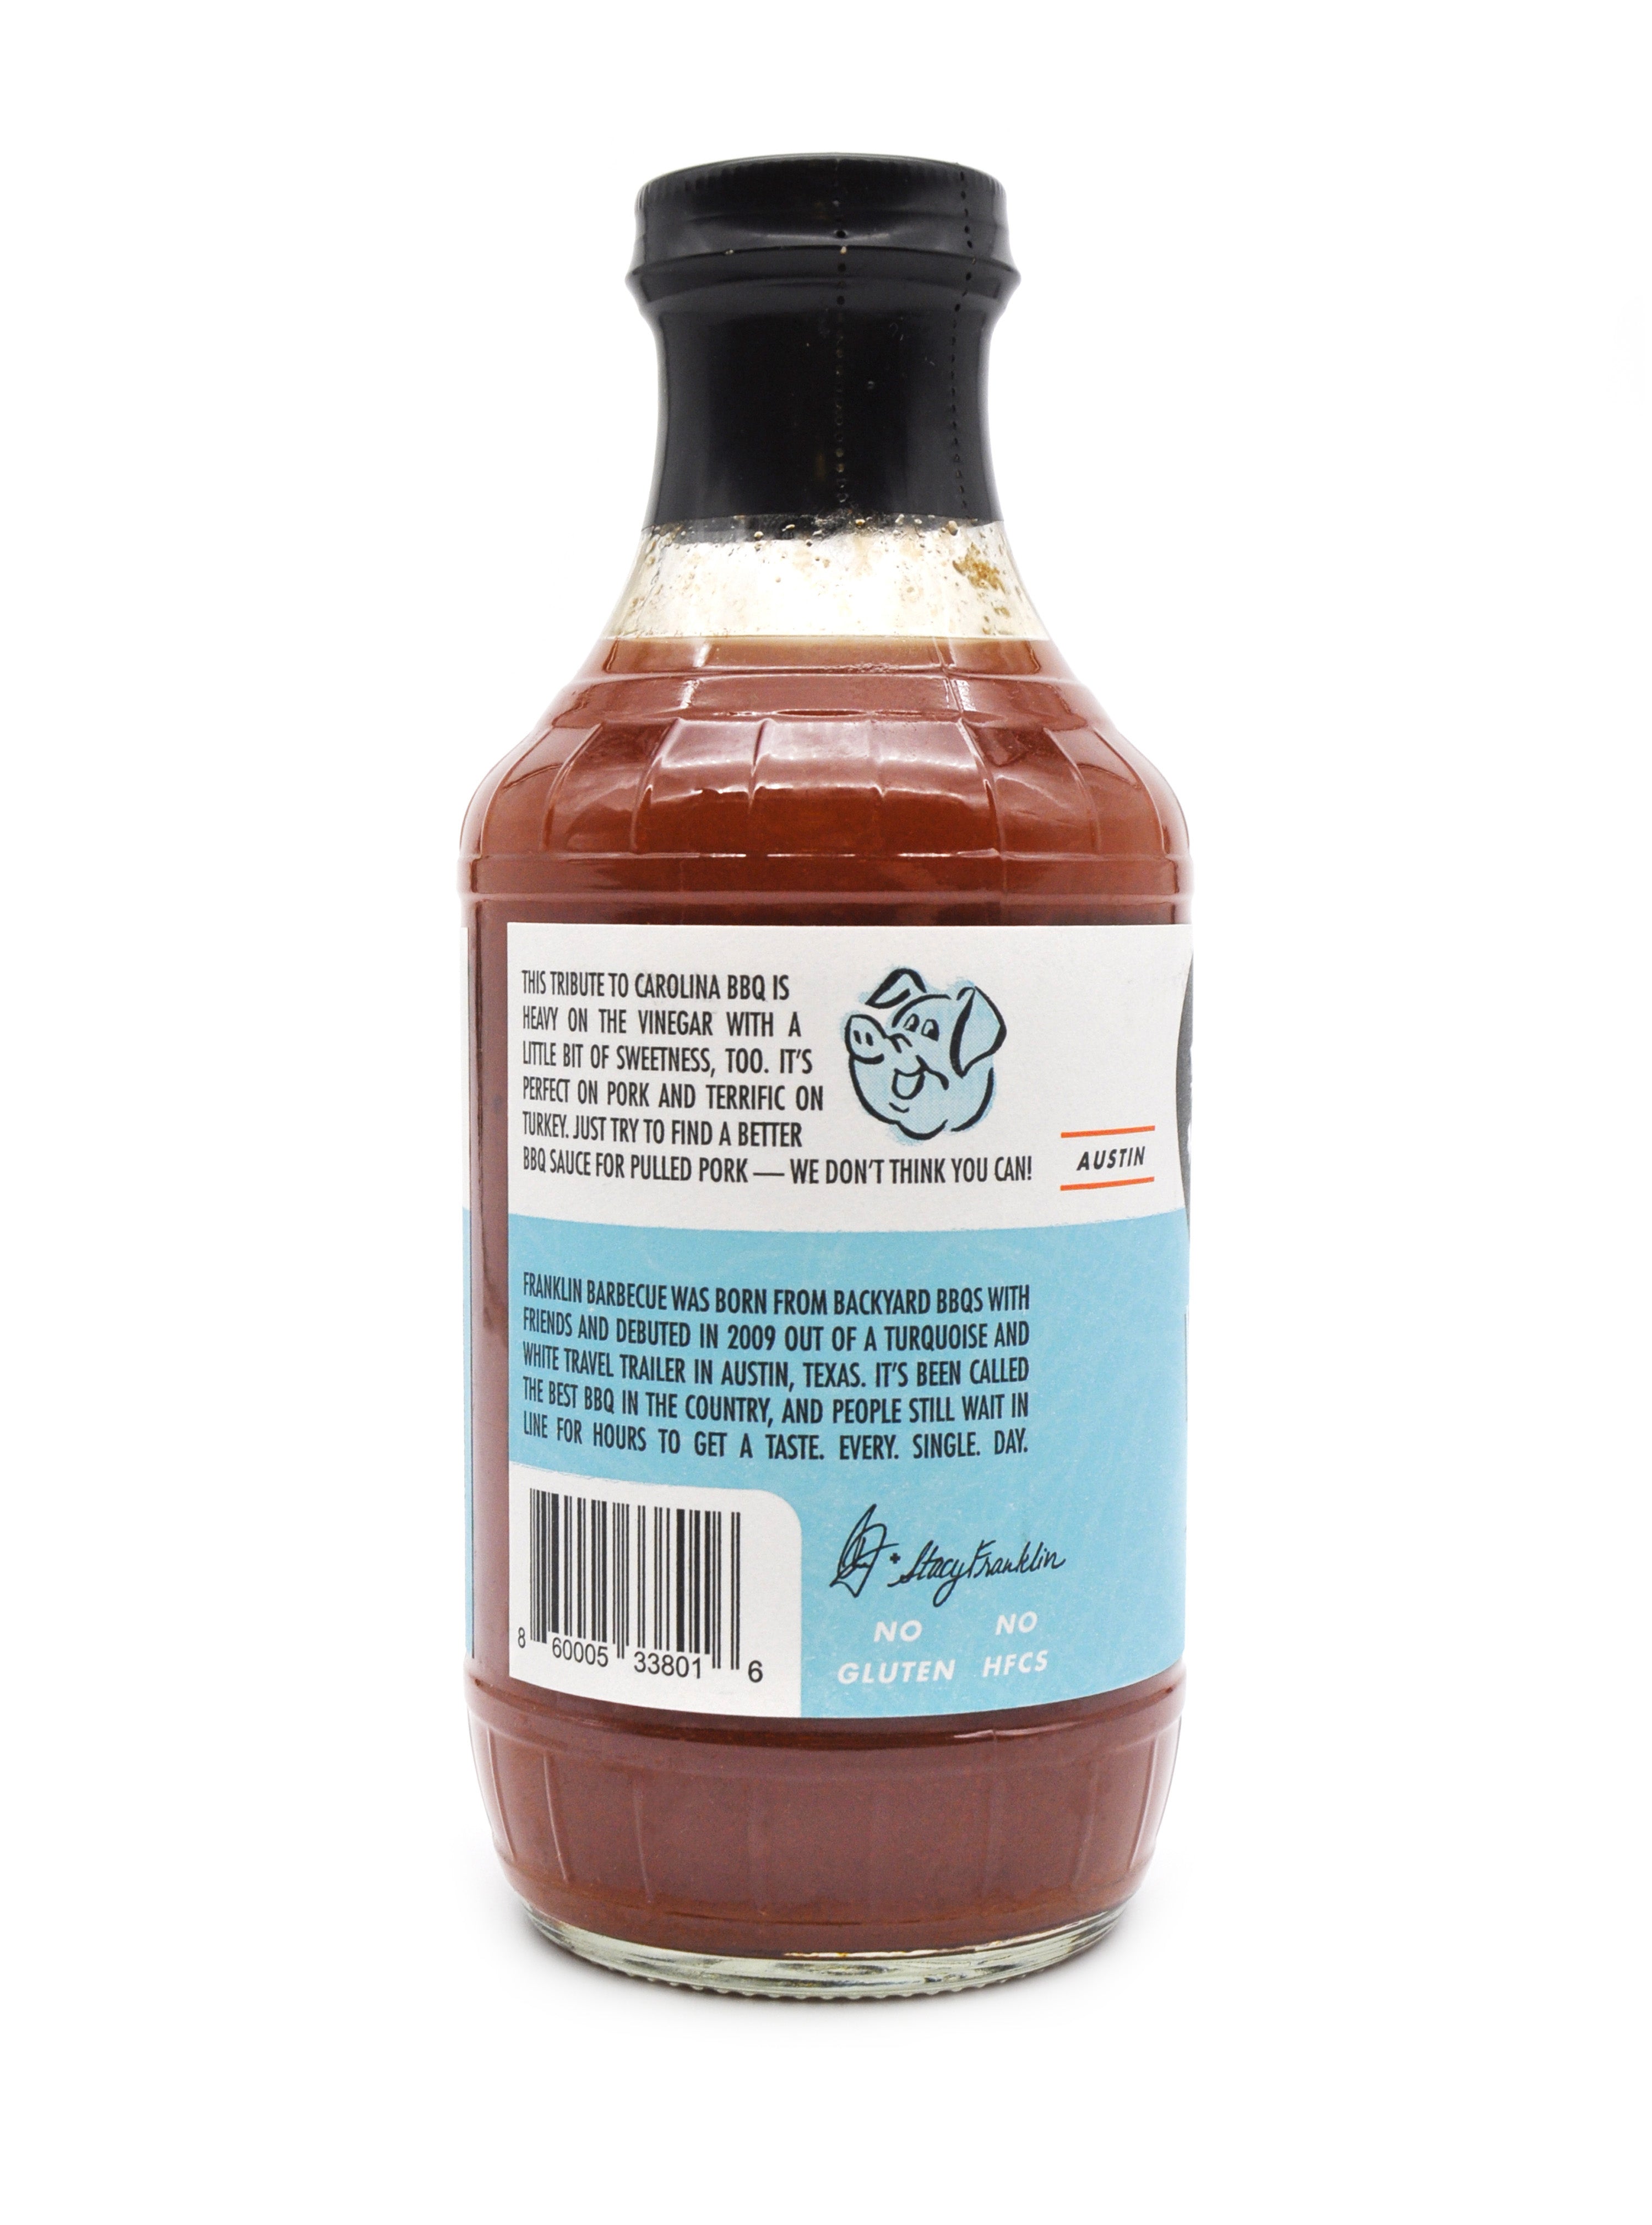 Back label of Franklin Barbecue Vinegar sauce showing tasting notes and background story of the restaurant.